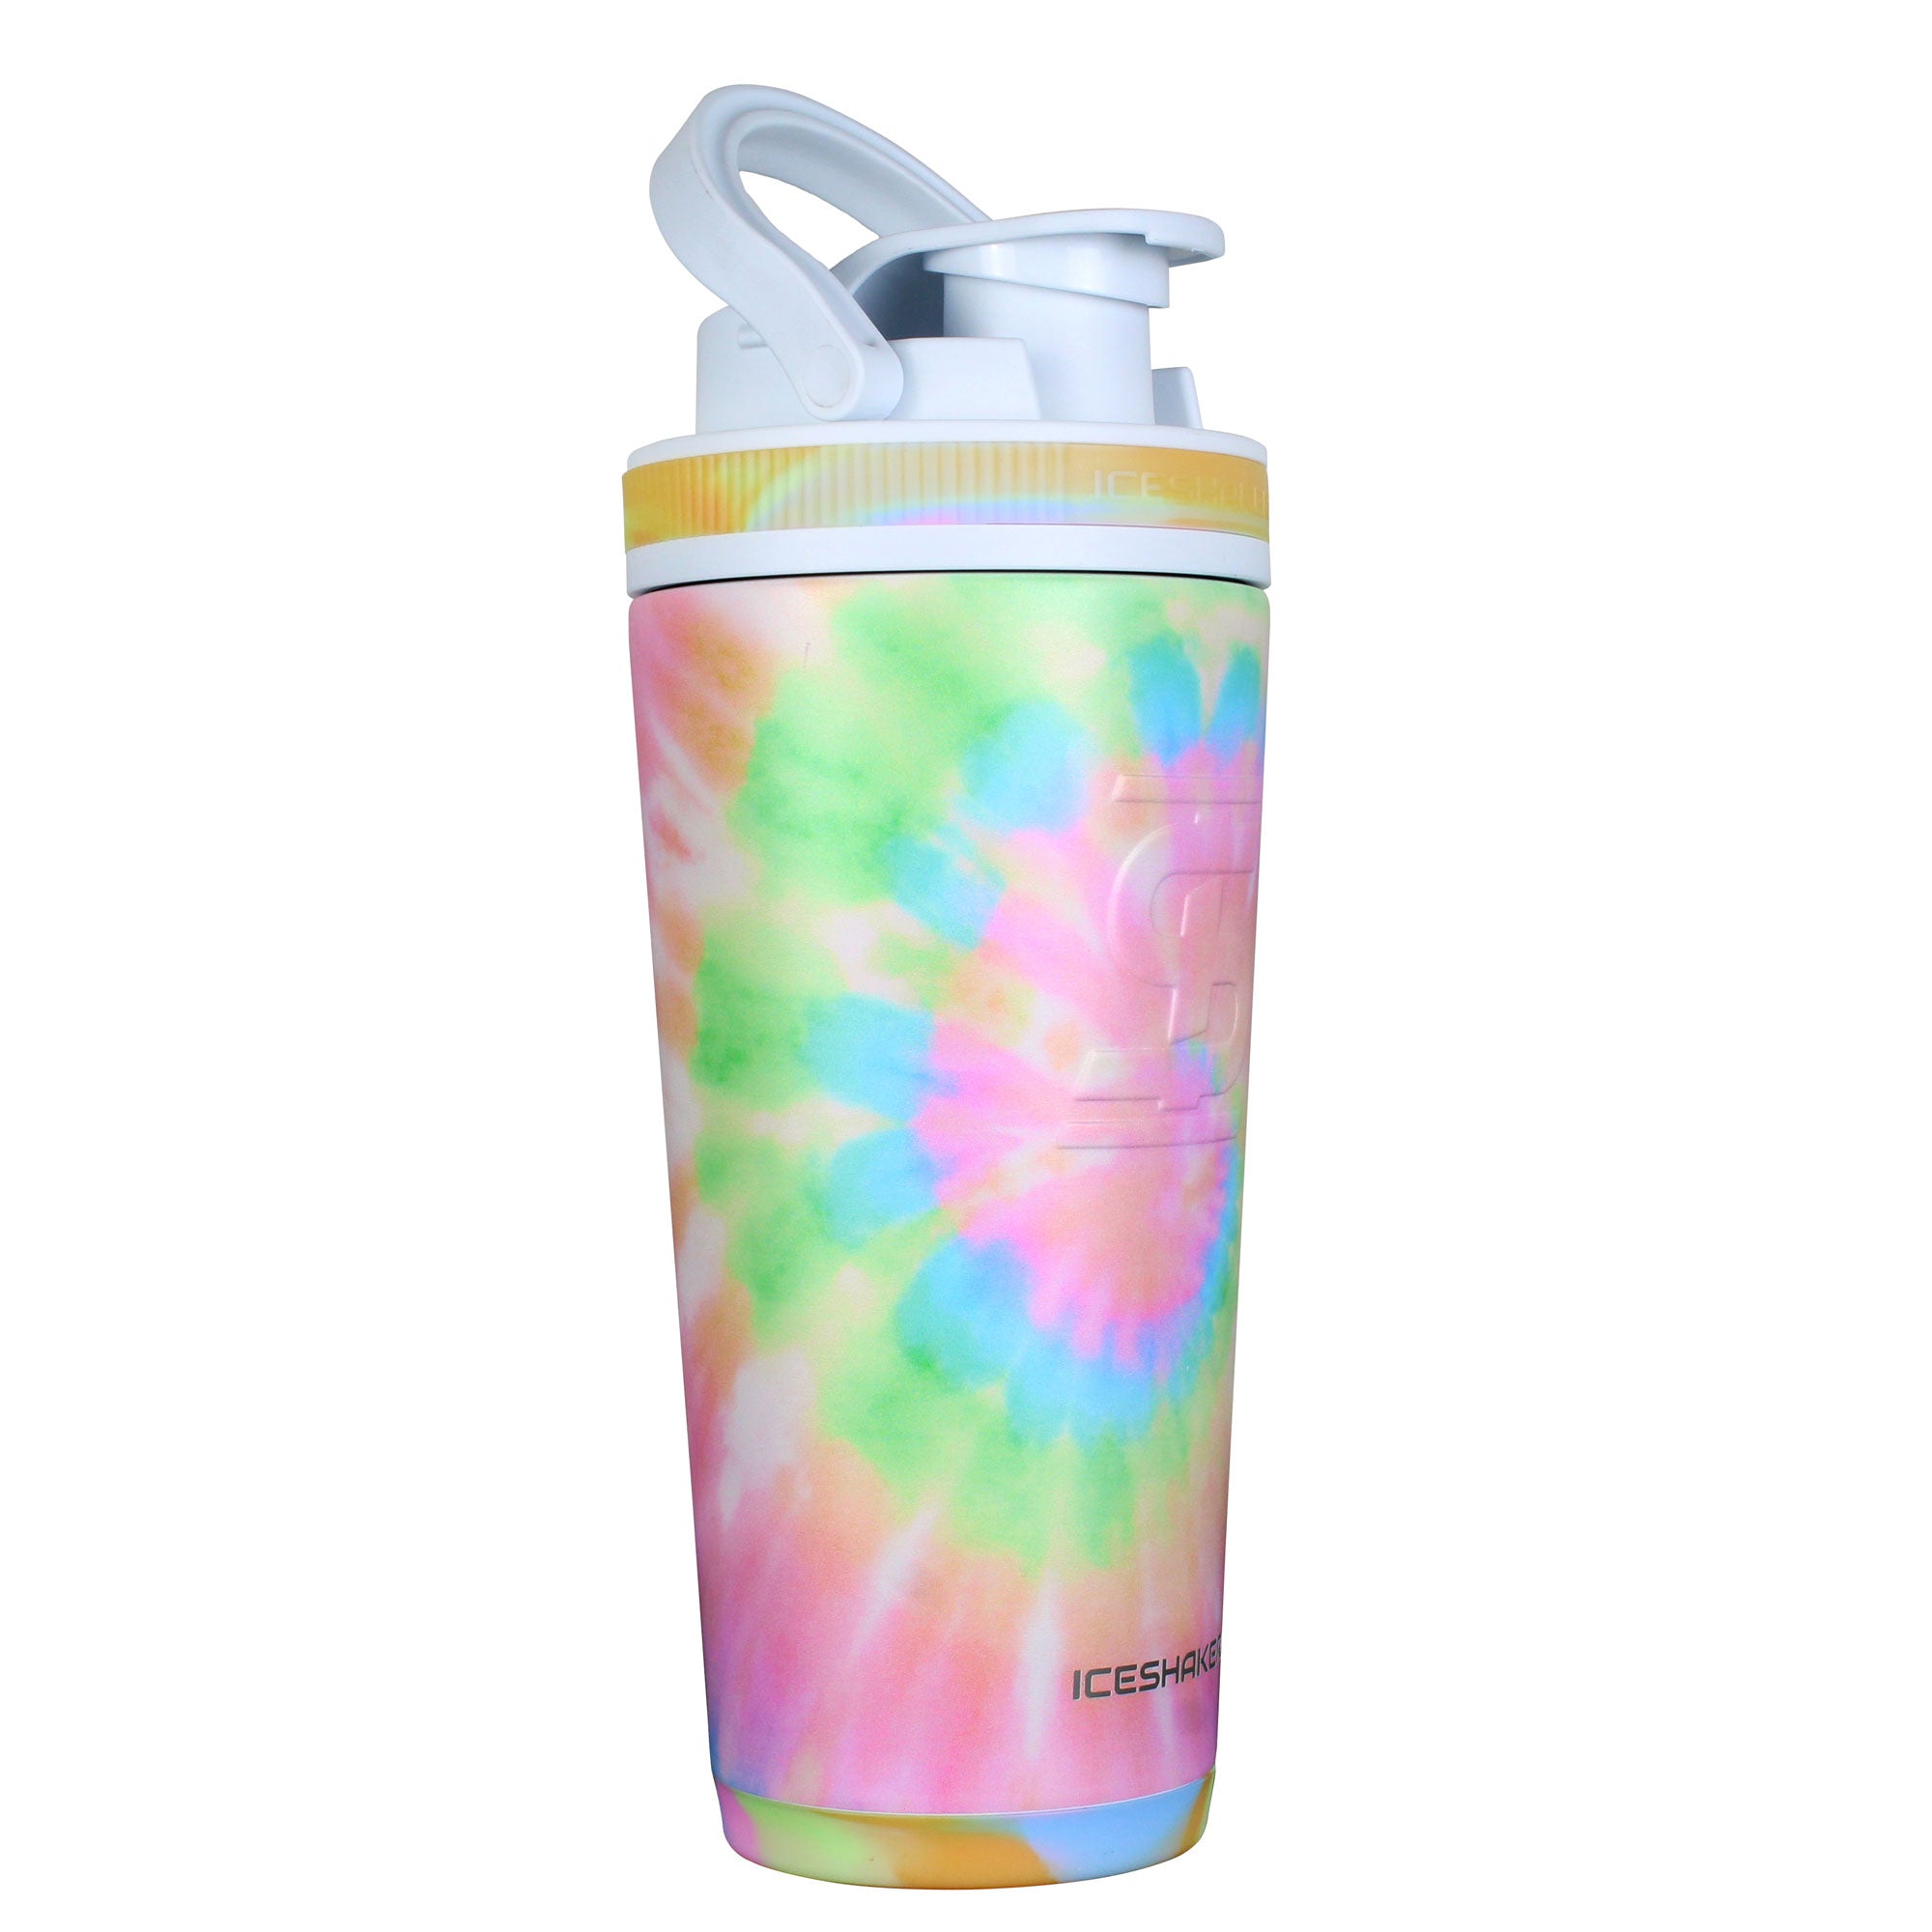 Buy 14oz travel coffee mug with direct drinking and pop-up straw